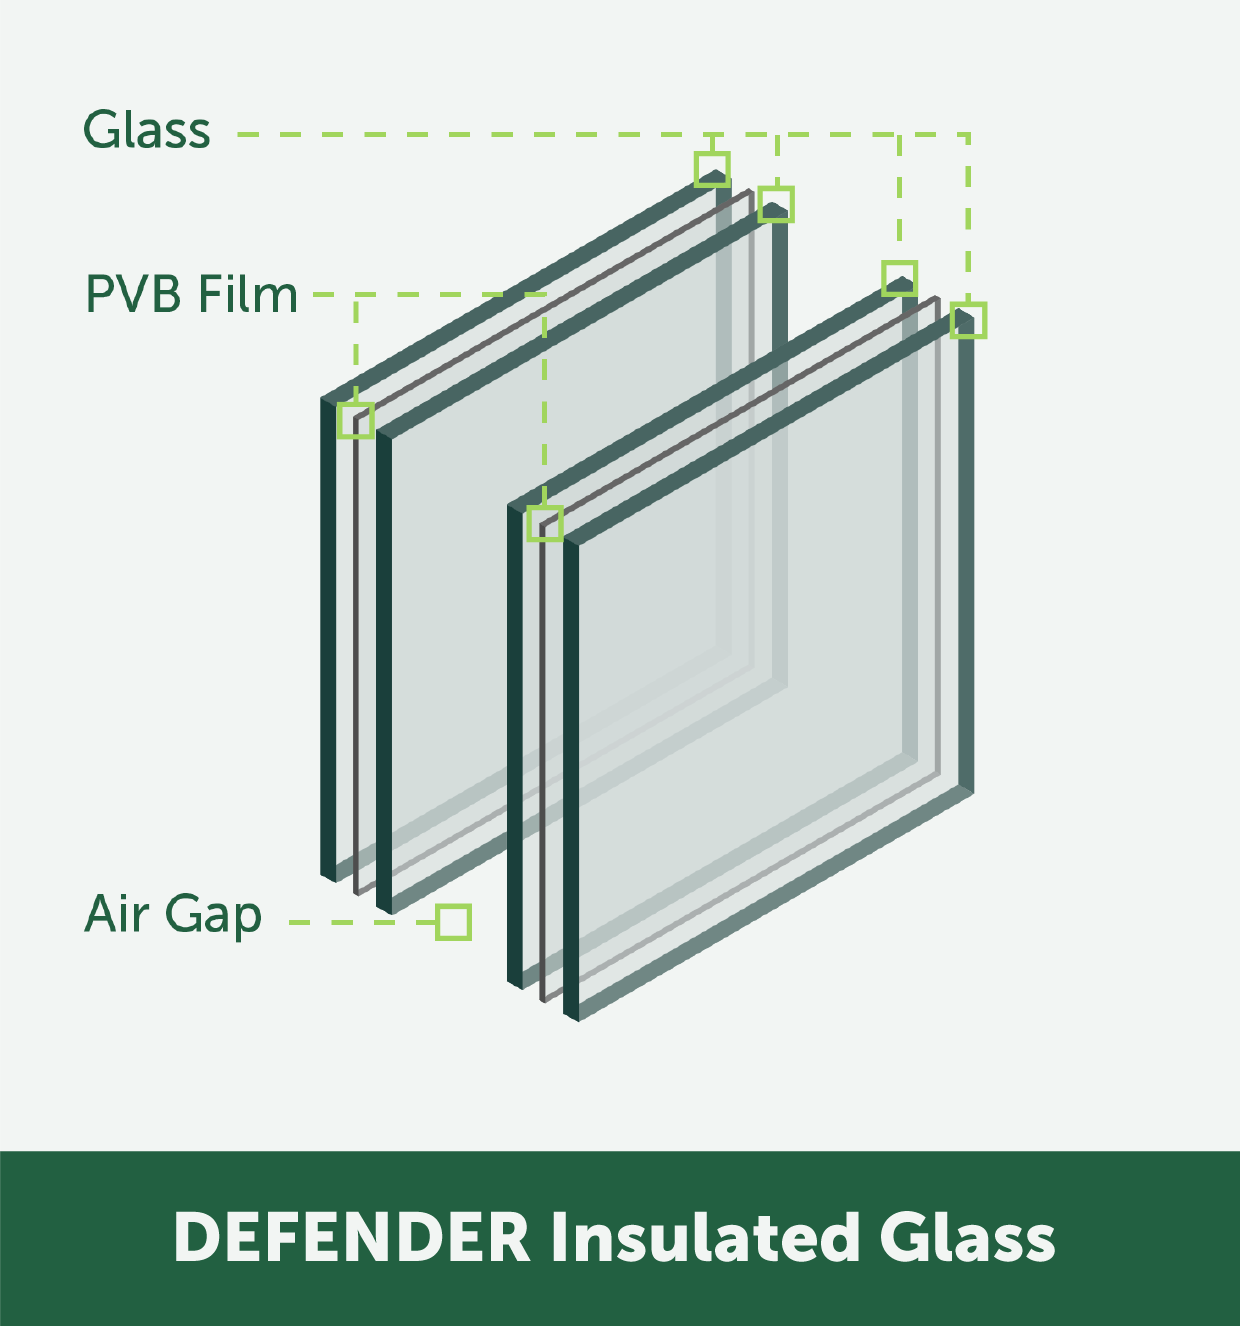 DEFENDER Insulated Glass